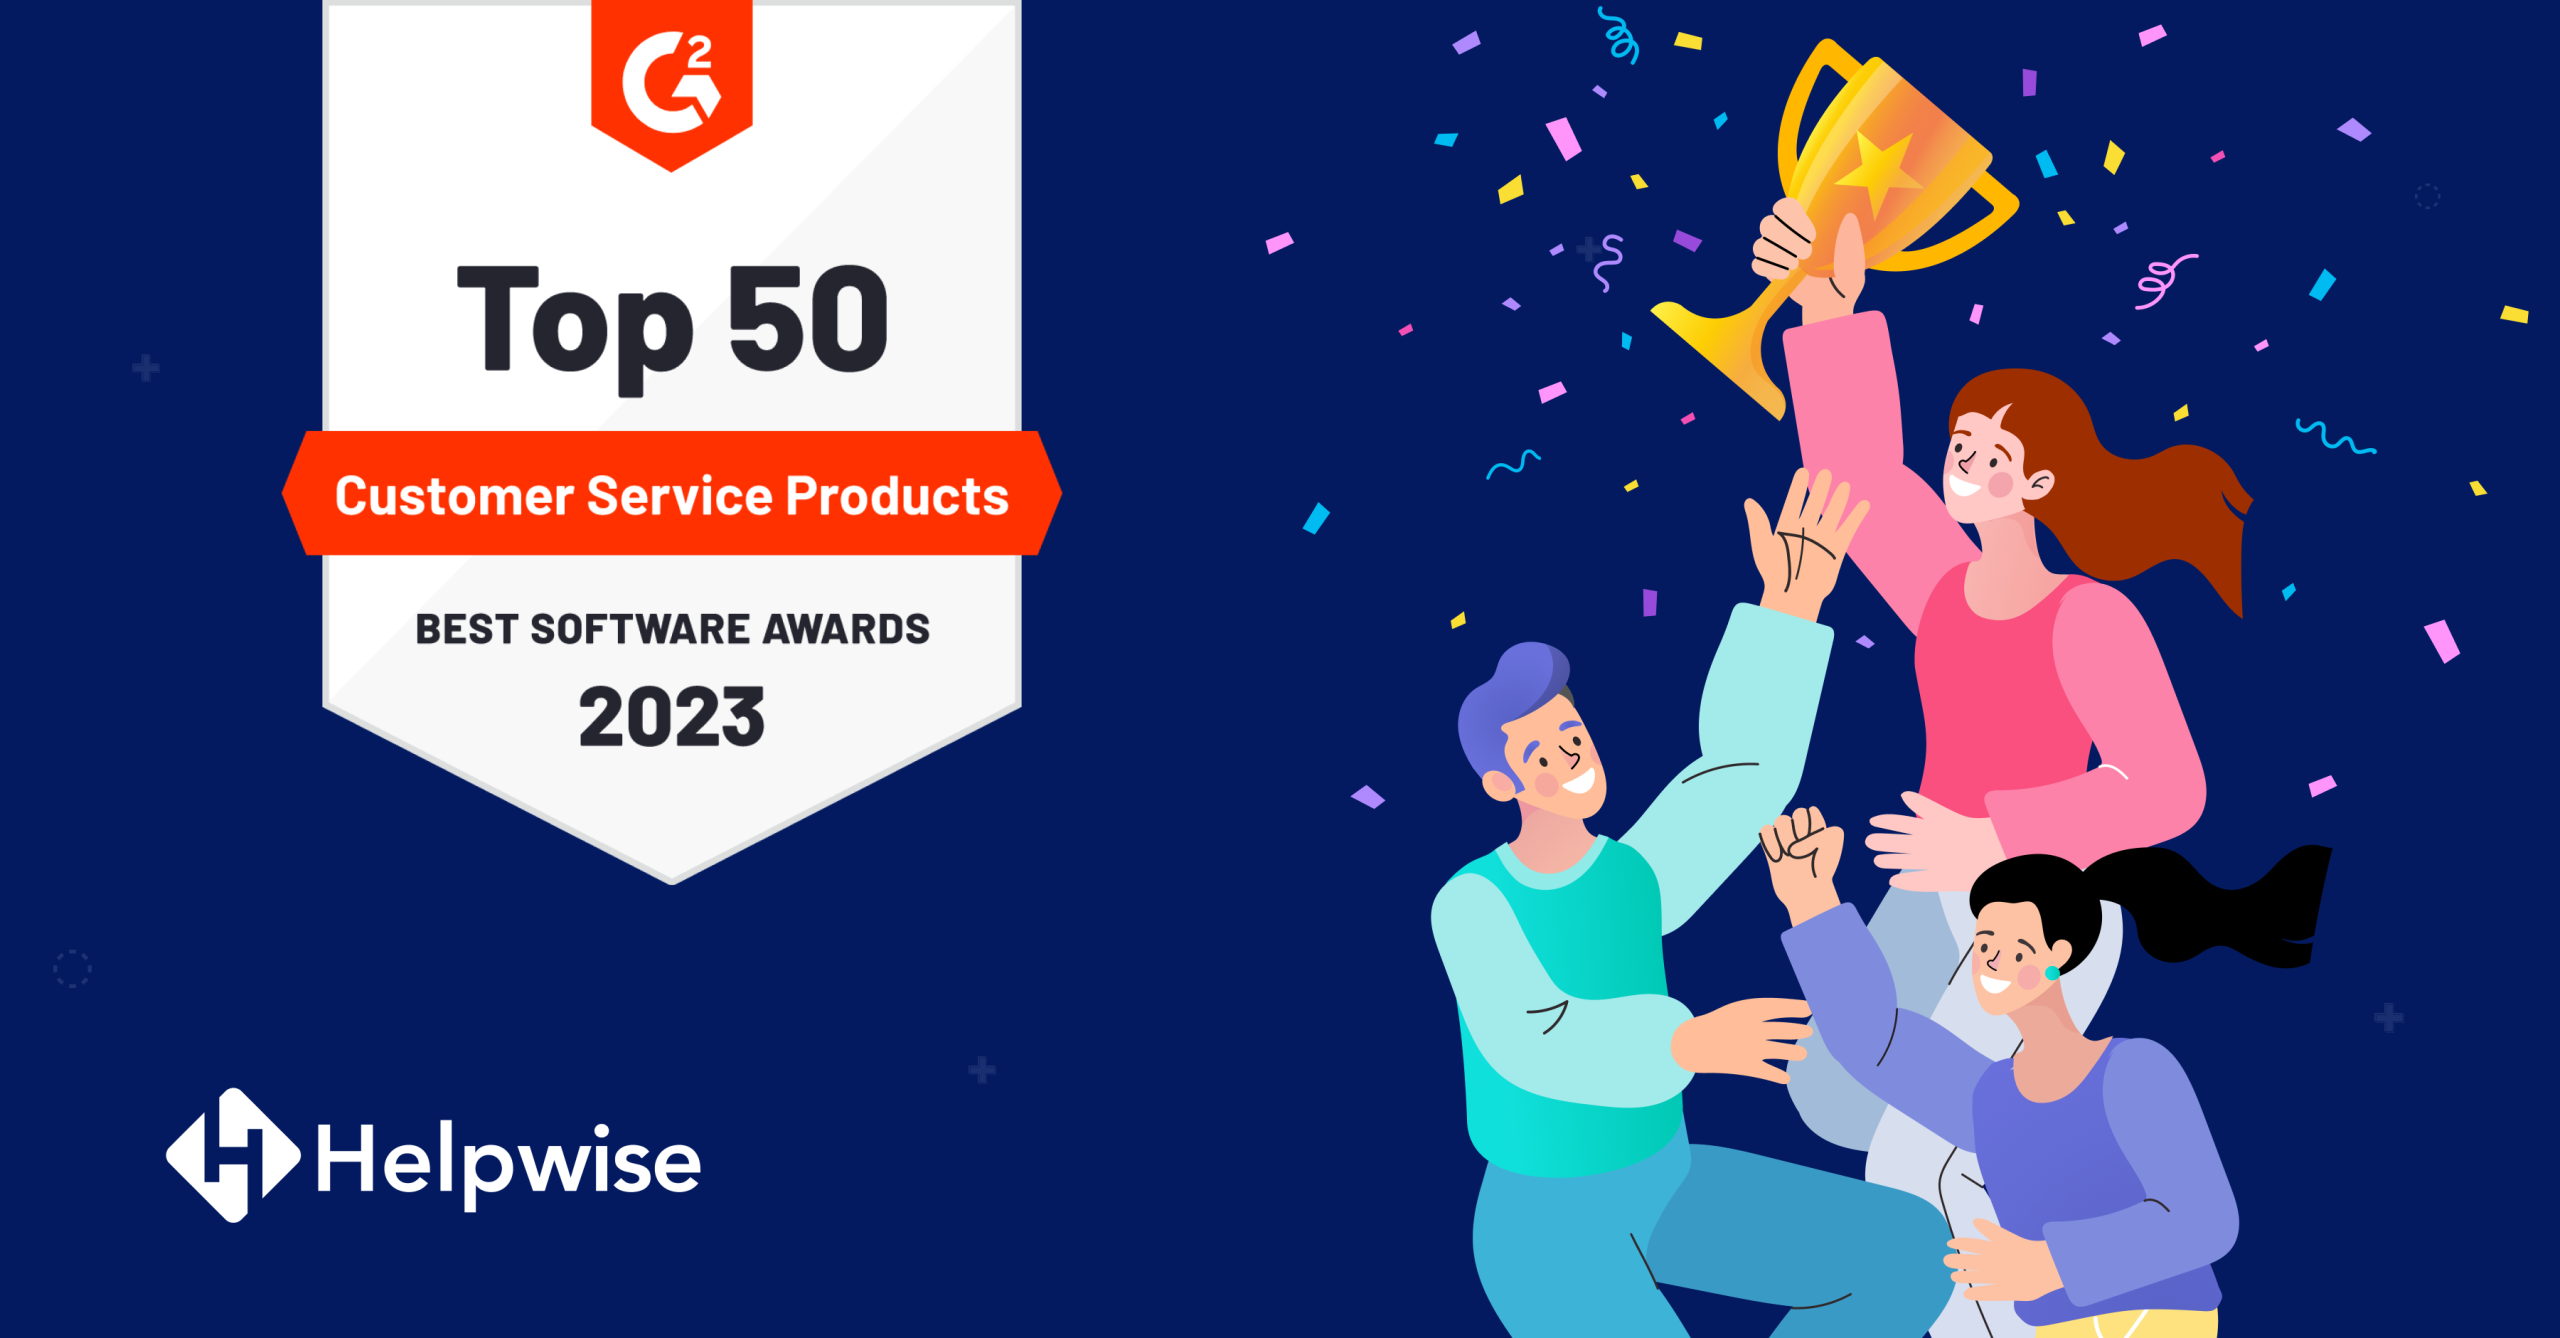 Helpwise Earns a Spot on the G2’s Top 50 Customer Service Products List 2